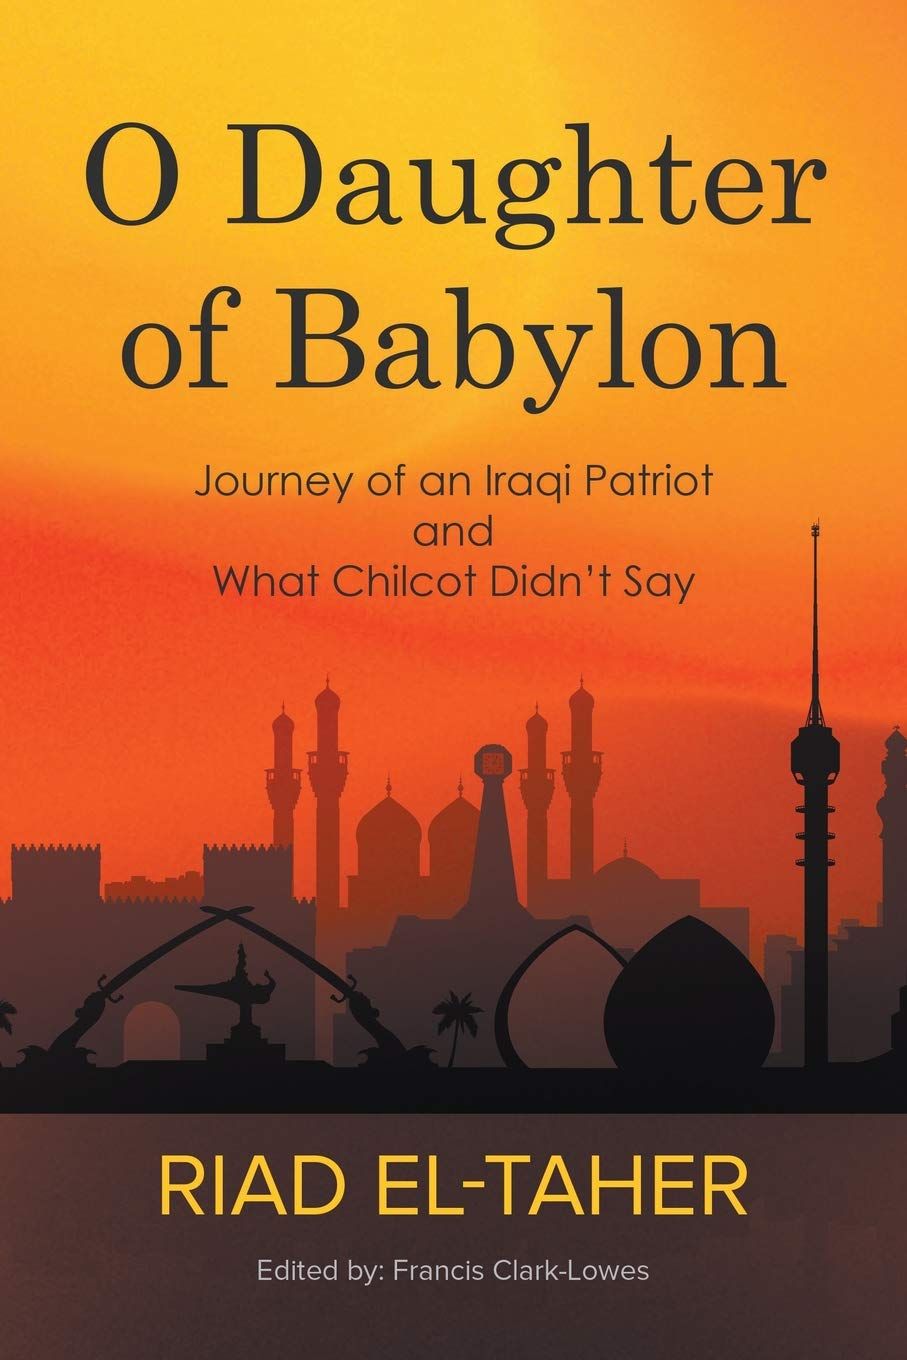 O Daughter of Babylon: Journey of an Iraqi Patriot and What Chilcot Didn’t Say